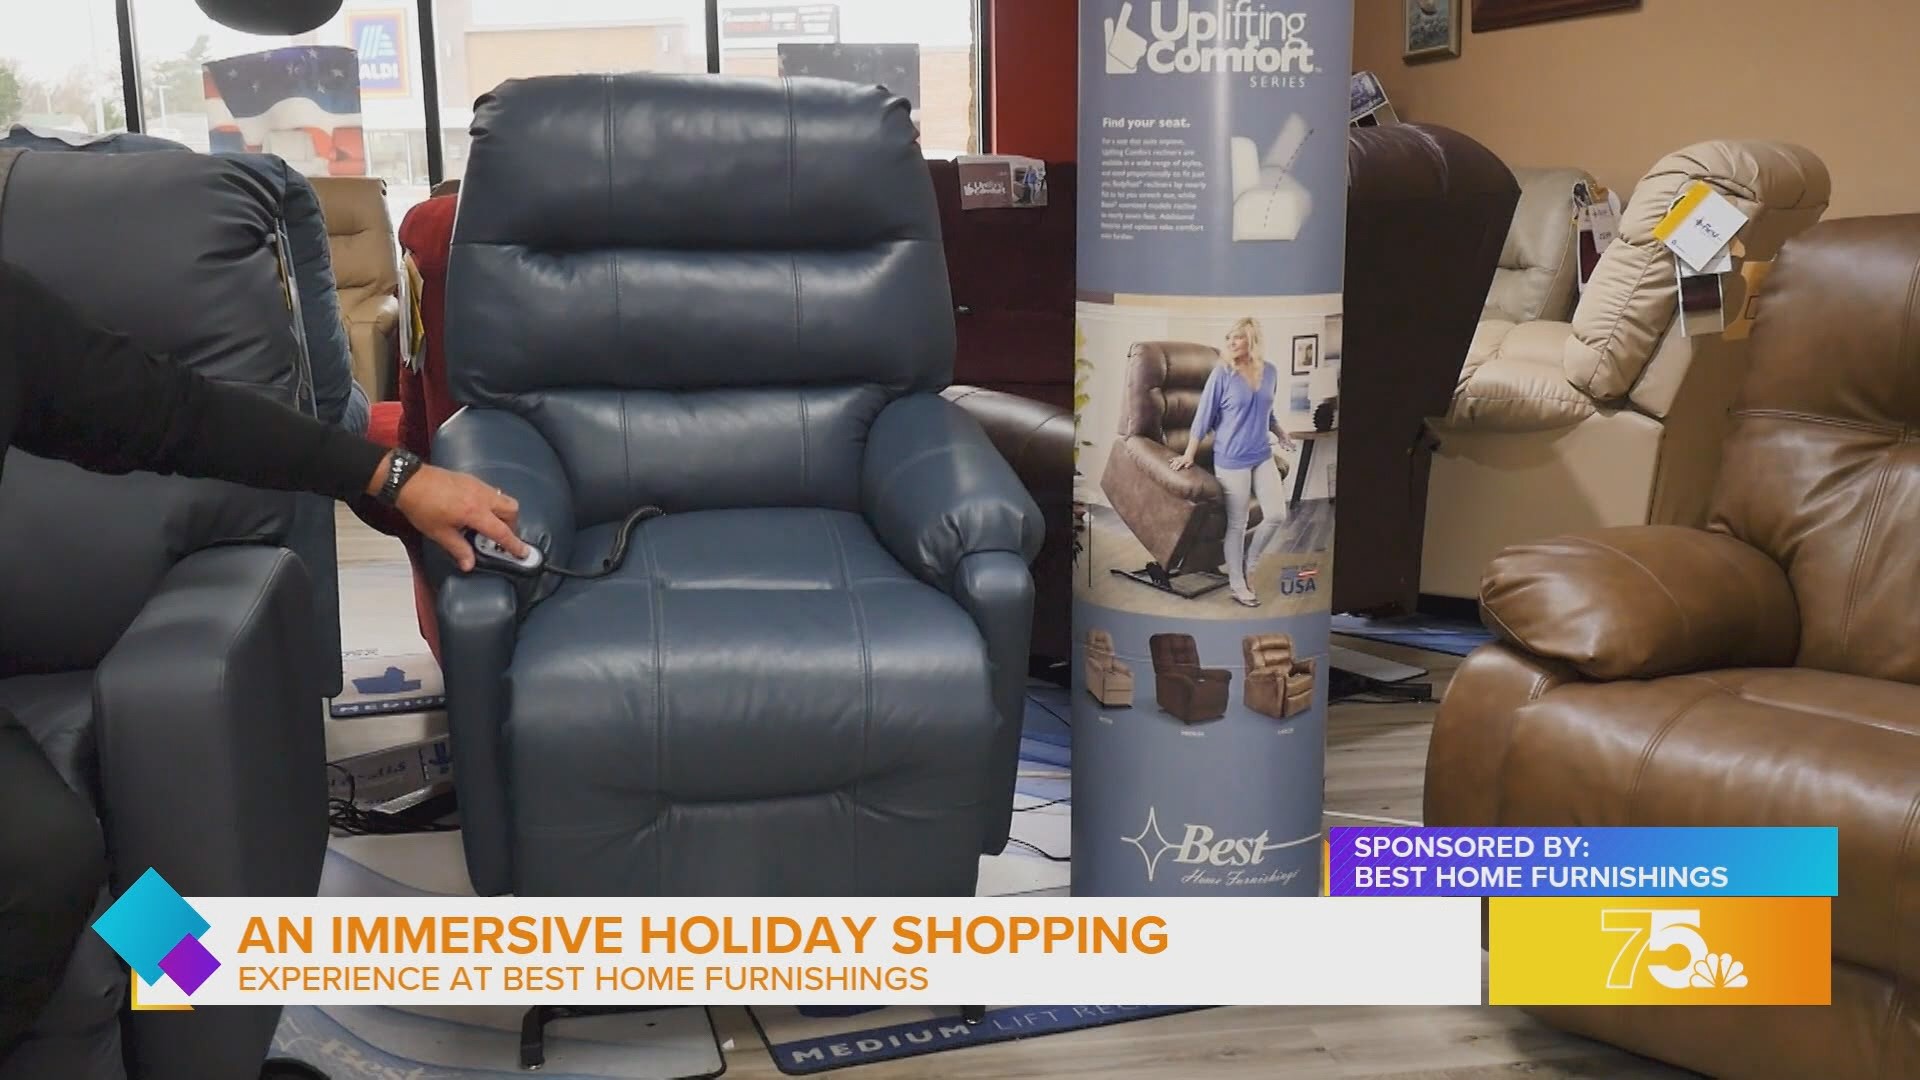 Shop local and shop American made this holiday season! Best Home Furnishings is offering major savings on floor samples & uplifting comfort recliners throughout Dec.